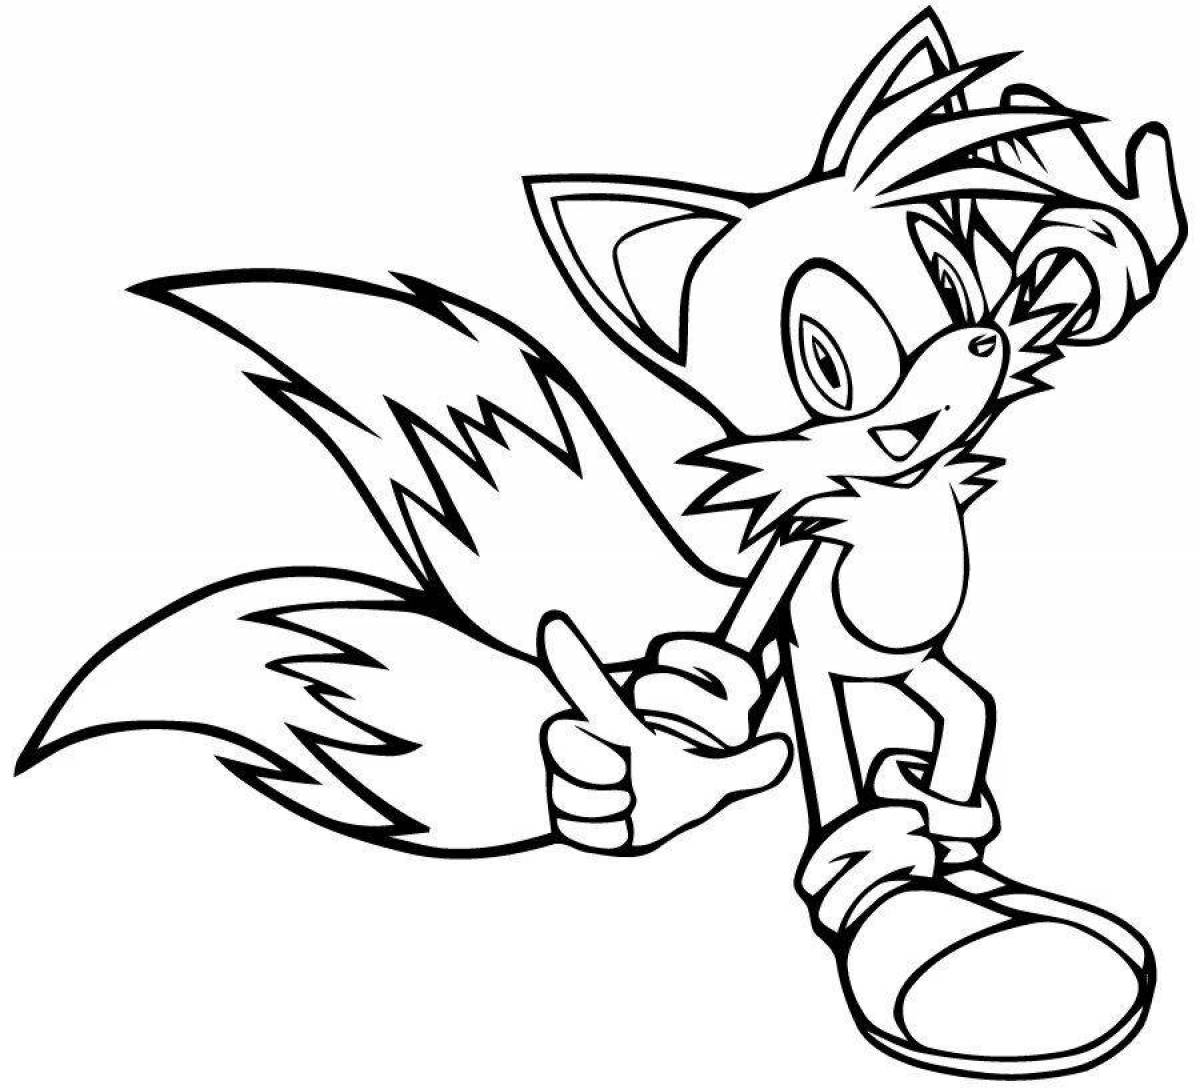 Playful tails exe coloring